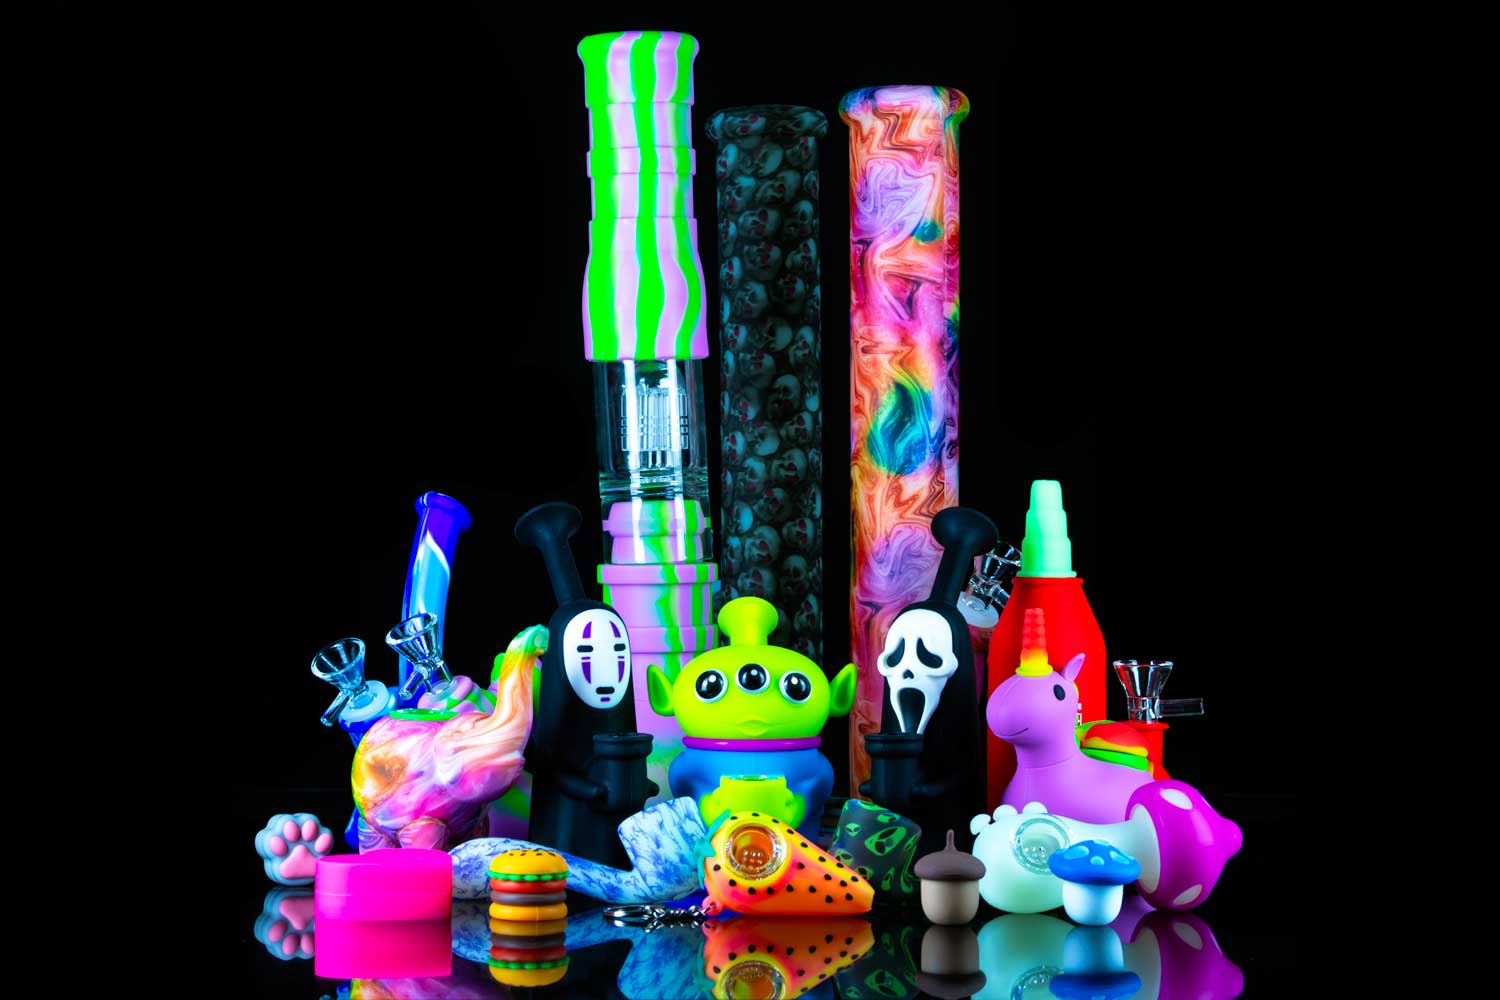 silicone bongs and rigs for sale on black table